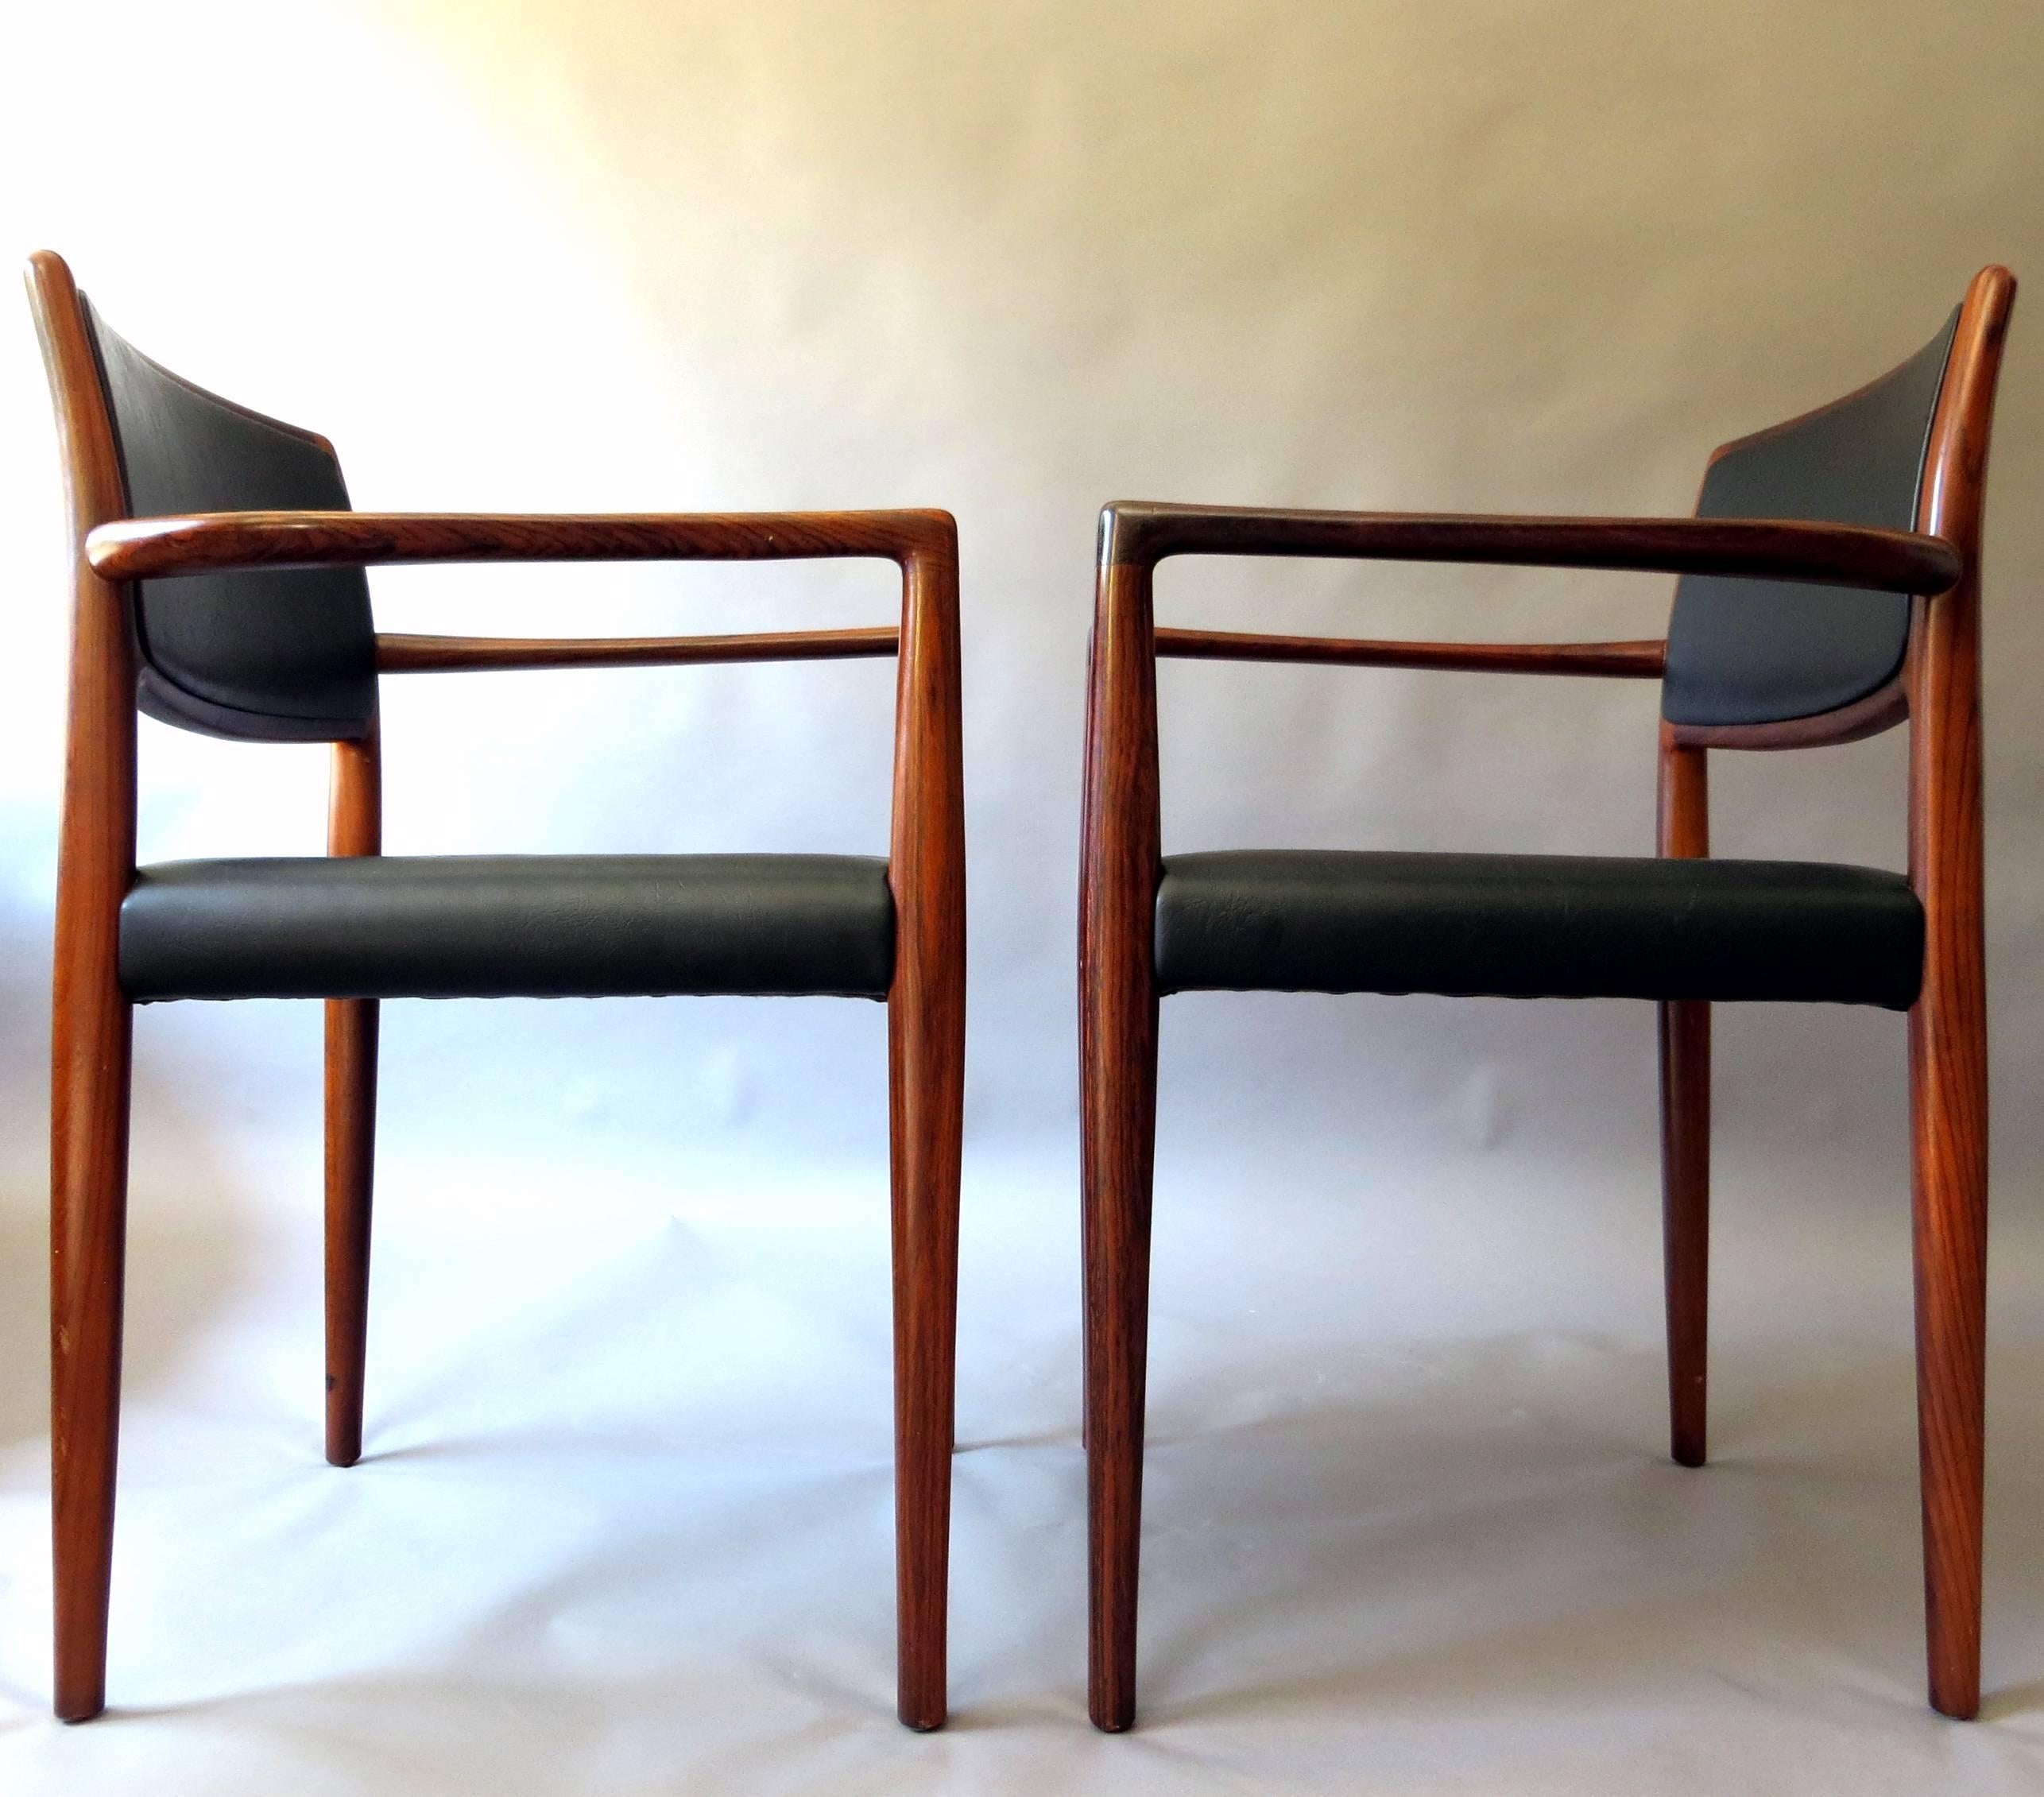 20th Century Danish Mid-Century Modern Rosewood and Leather Dining Chairs, Set of Two, 1960s For Sale